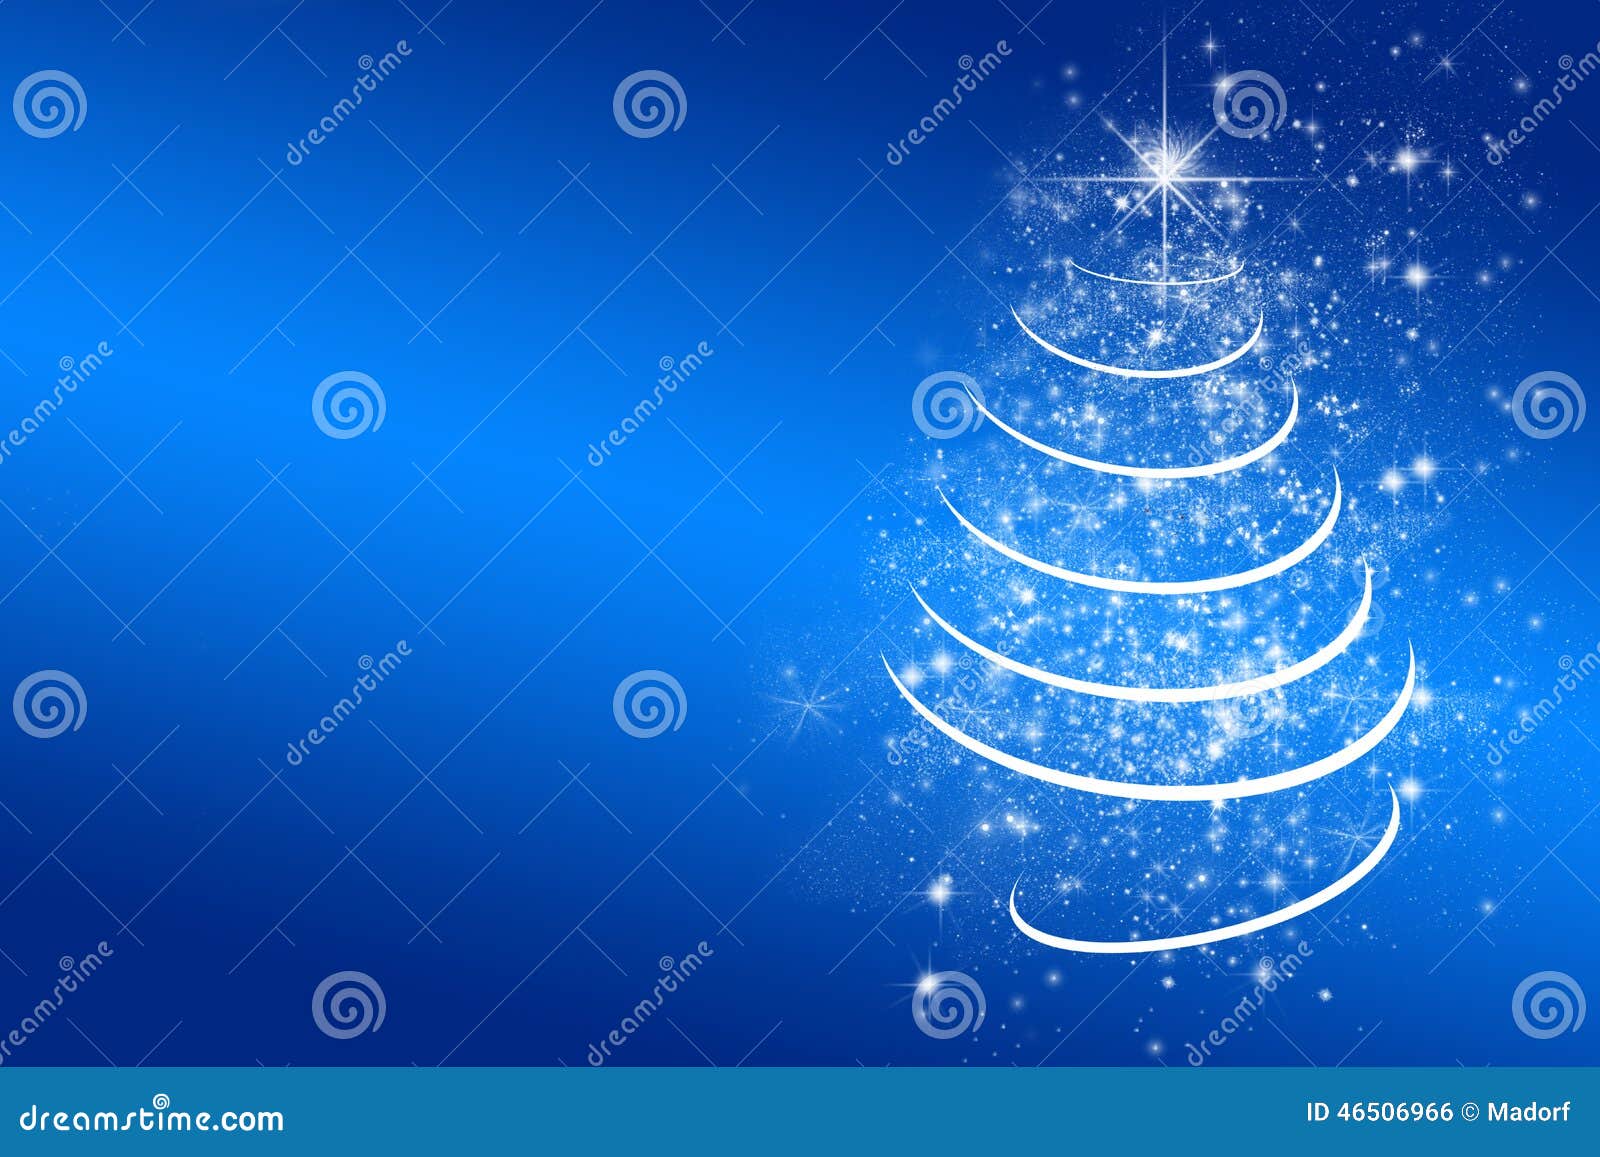 Blue Christmas Background With White Christmas Tree Stock 